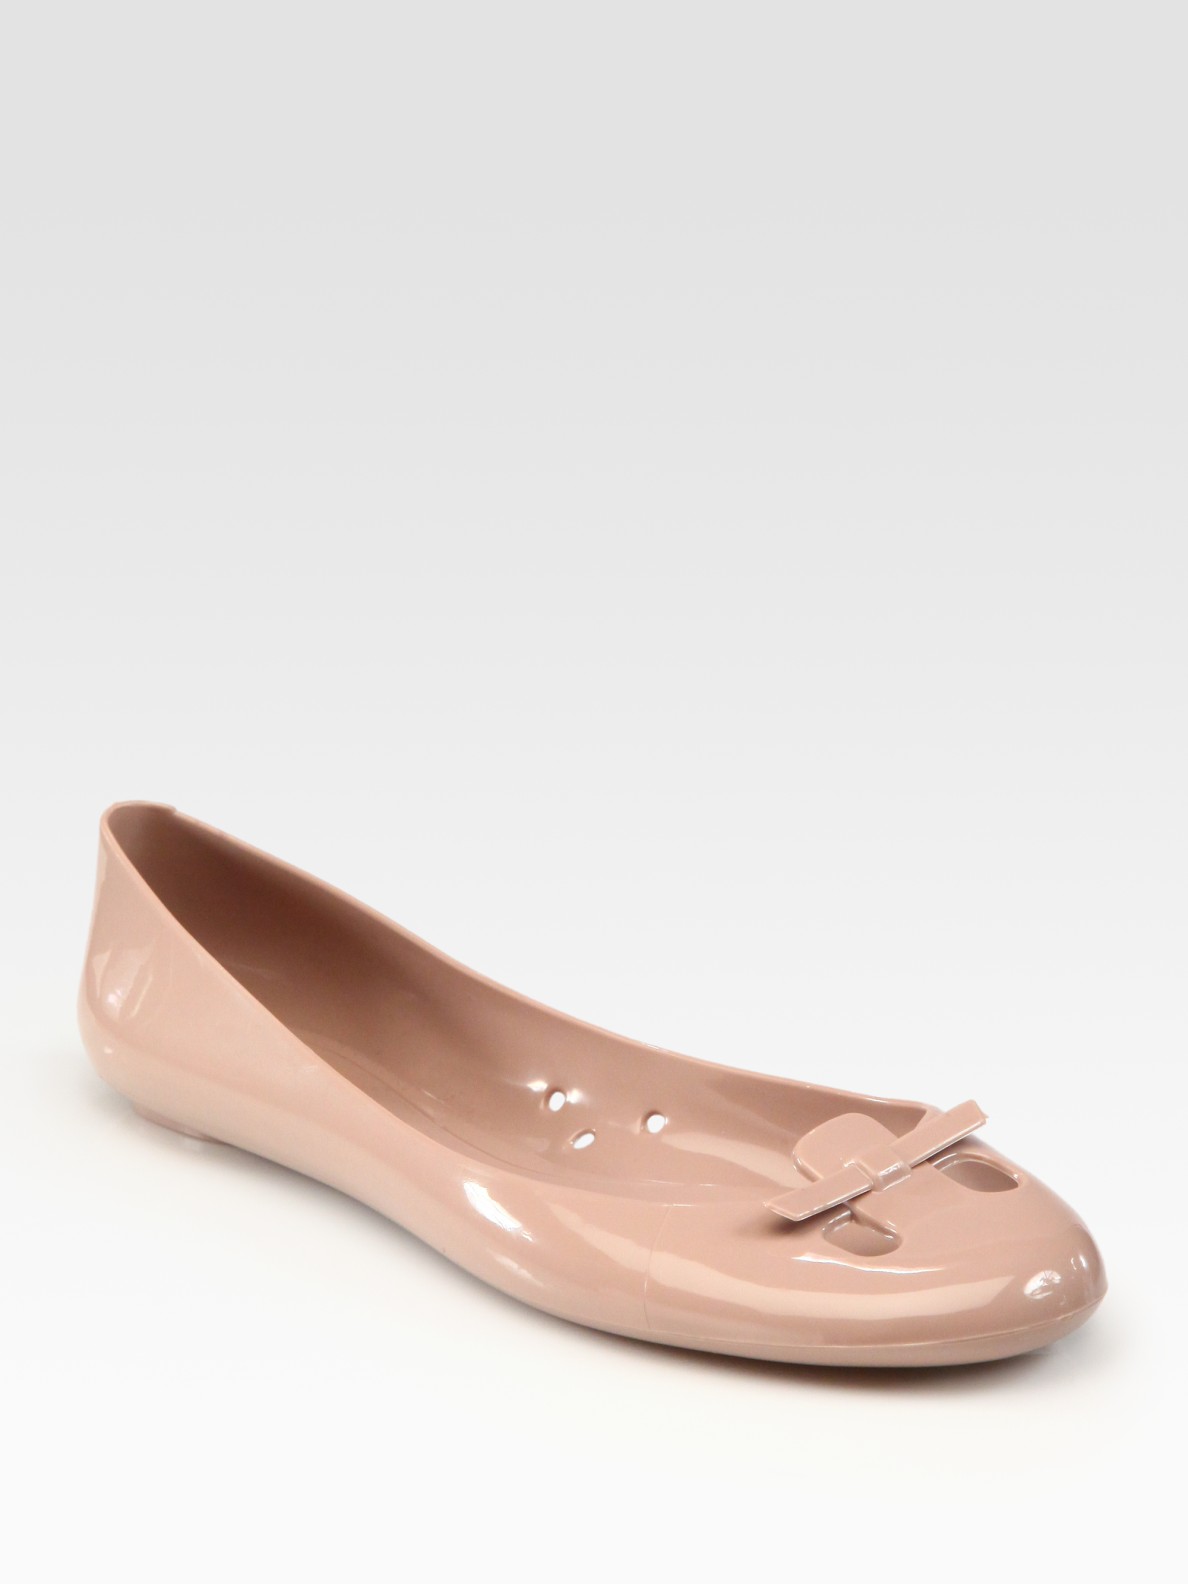 jelly ballet shoes